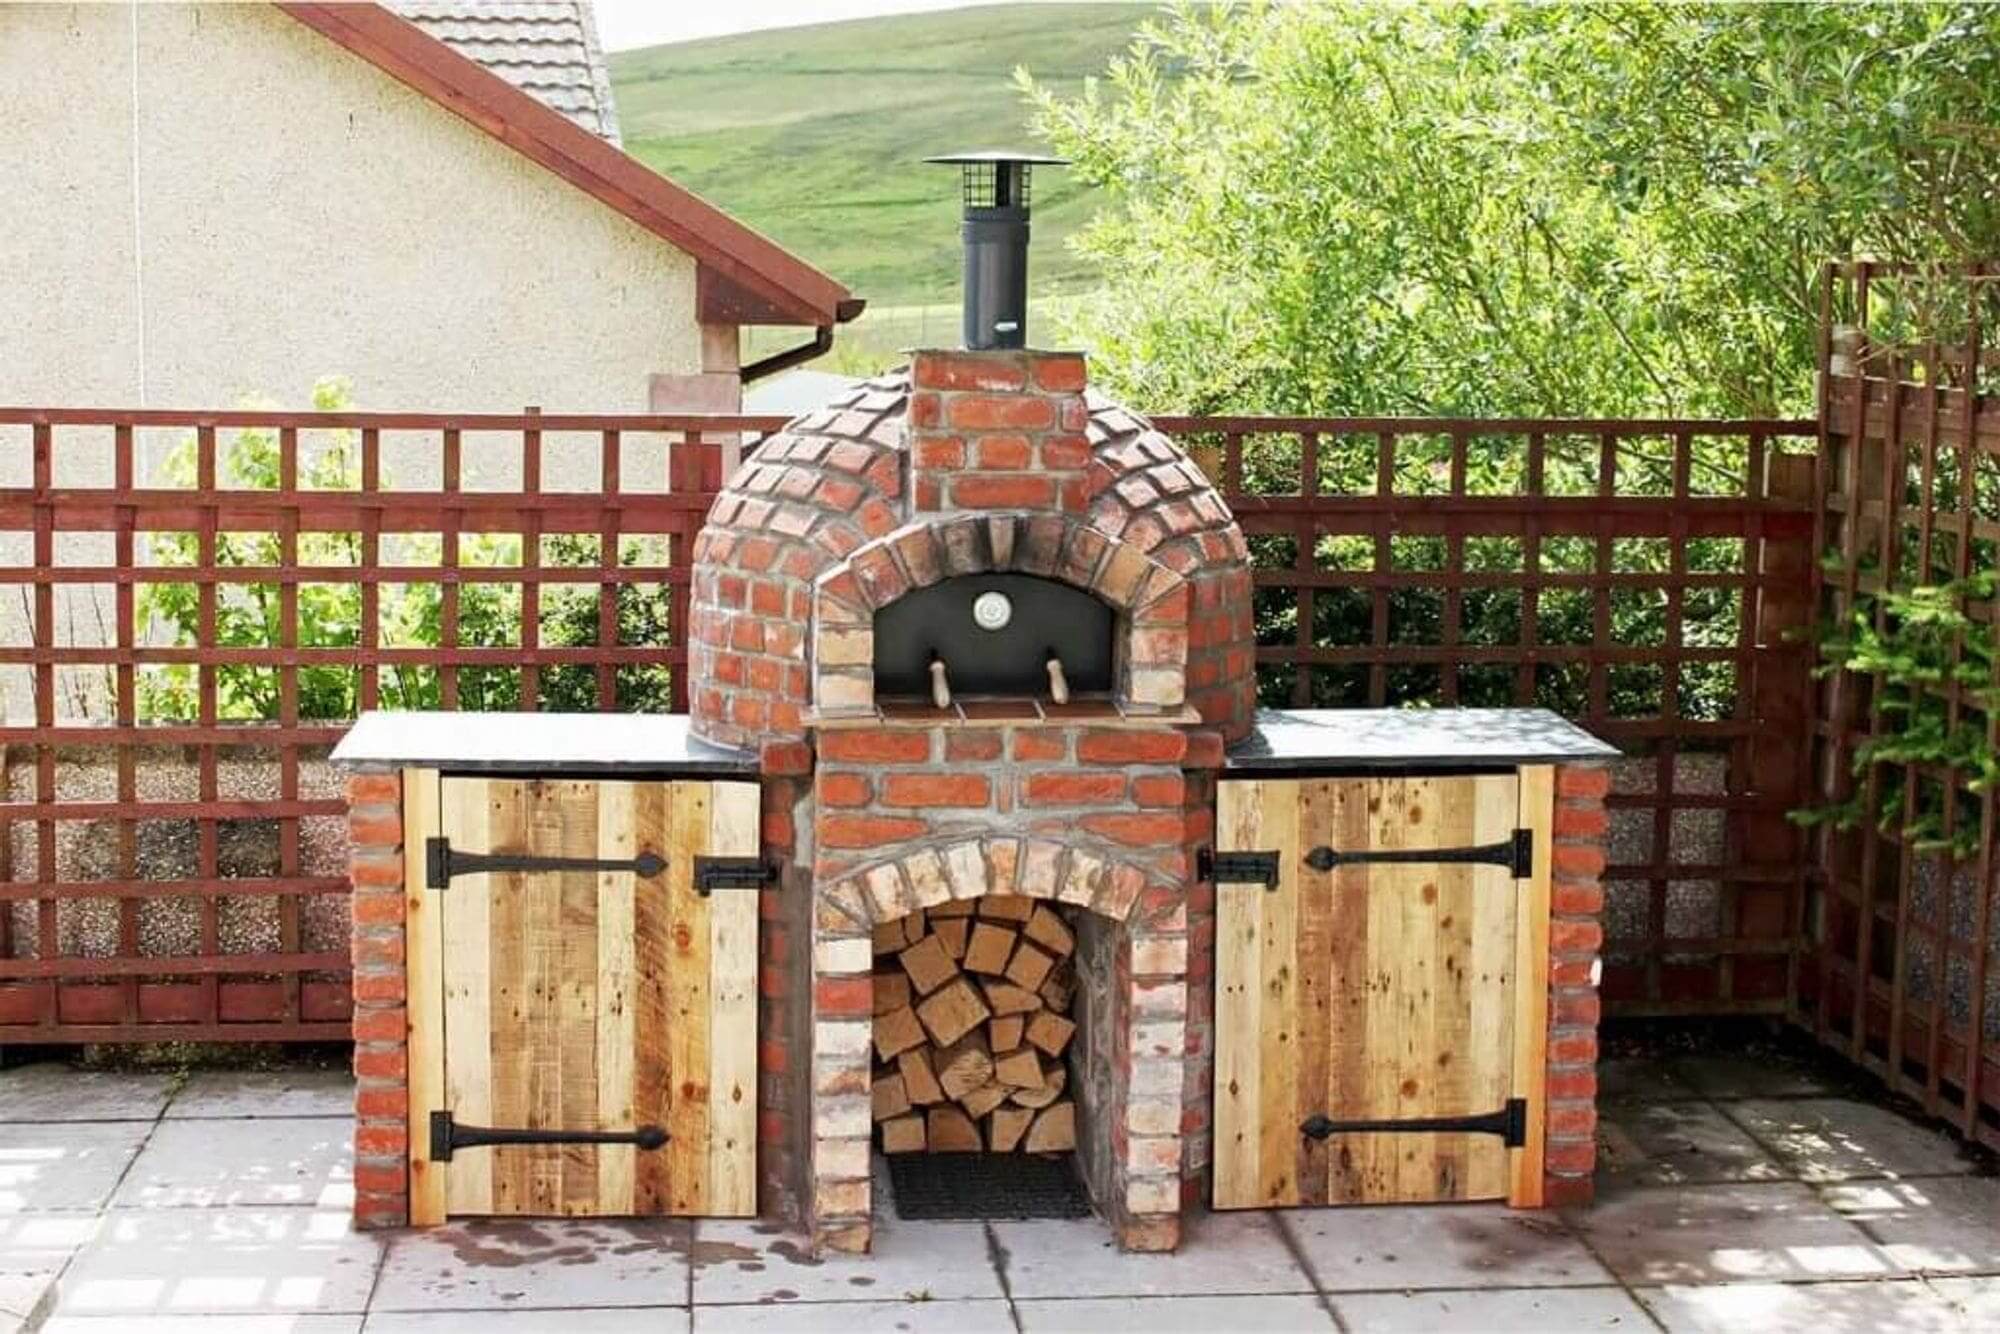 An outdoor pizza oven with the ideal materials used